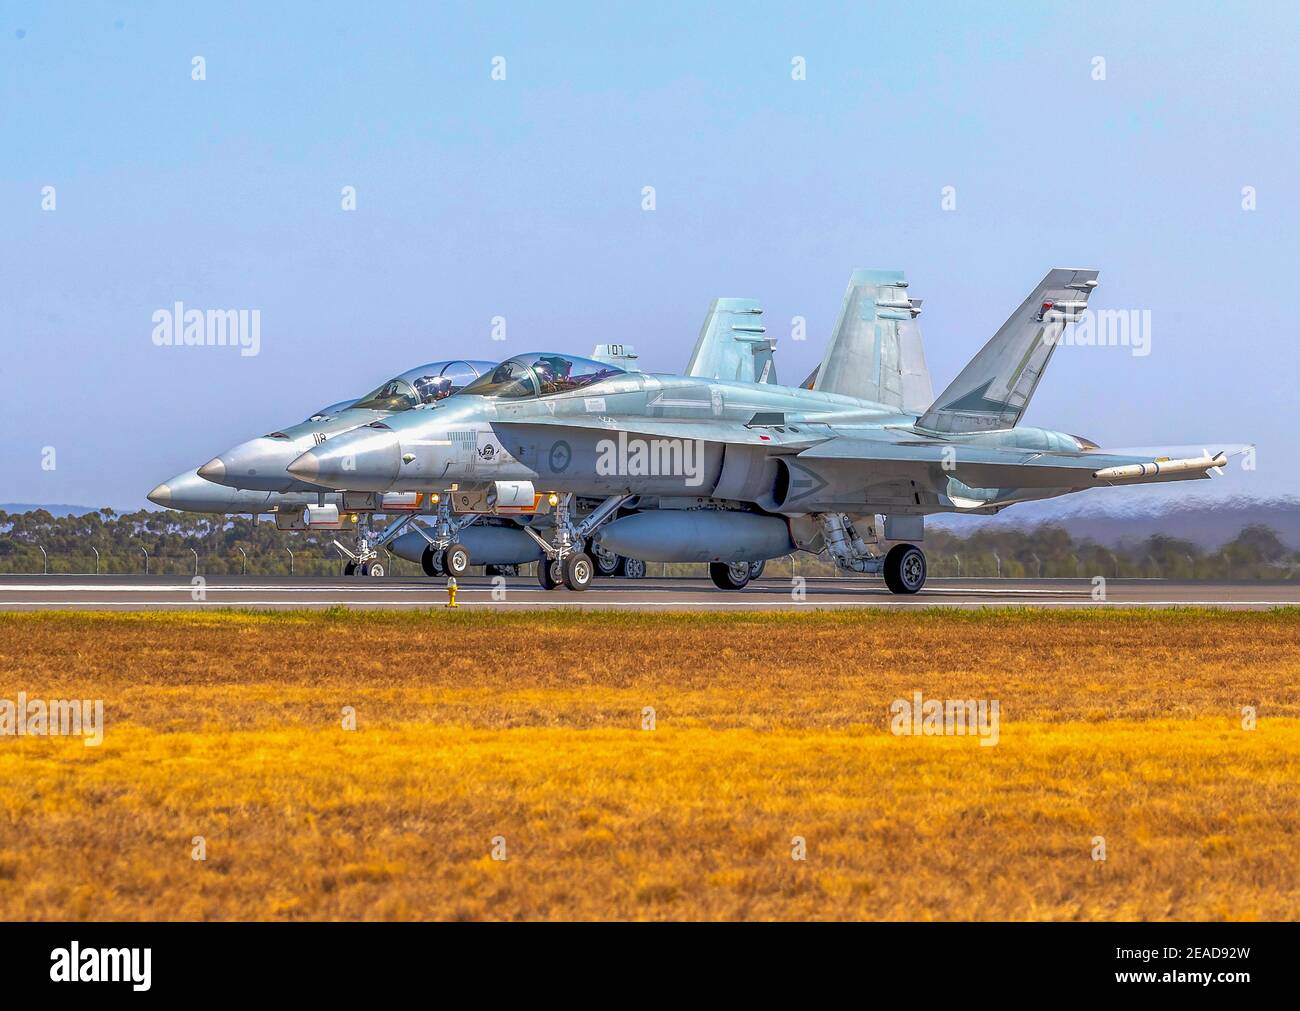 Royal Australian Air Force McDonnell Douglas F/A-18 Hornet twin-engine, carrier-capable, multirole fighter aircraft Stock Photo